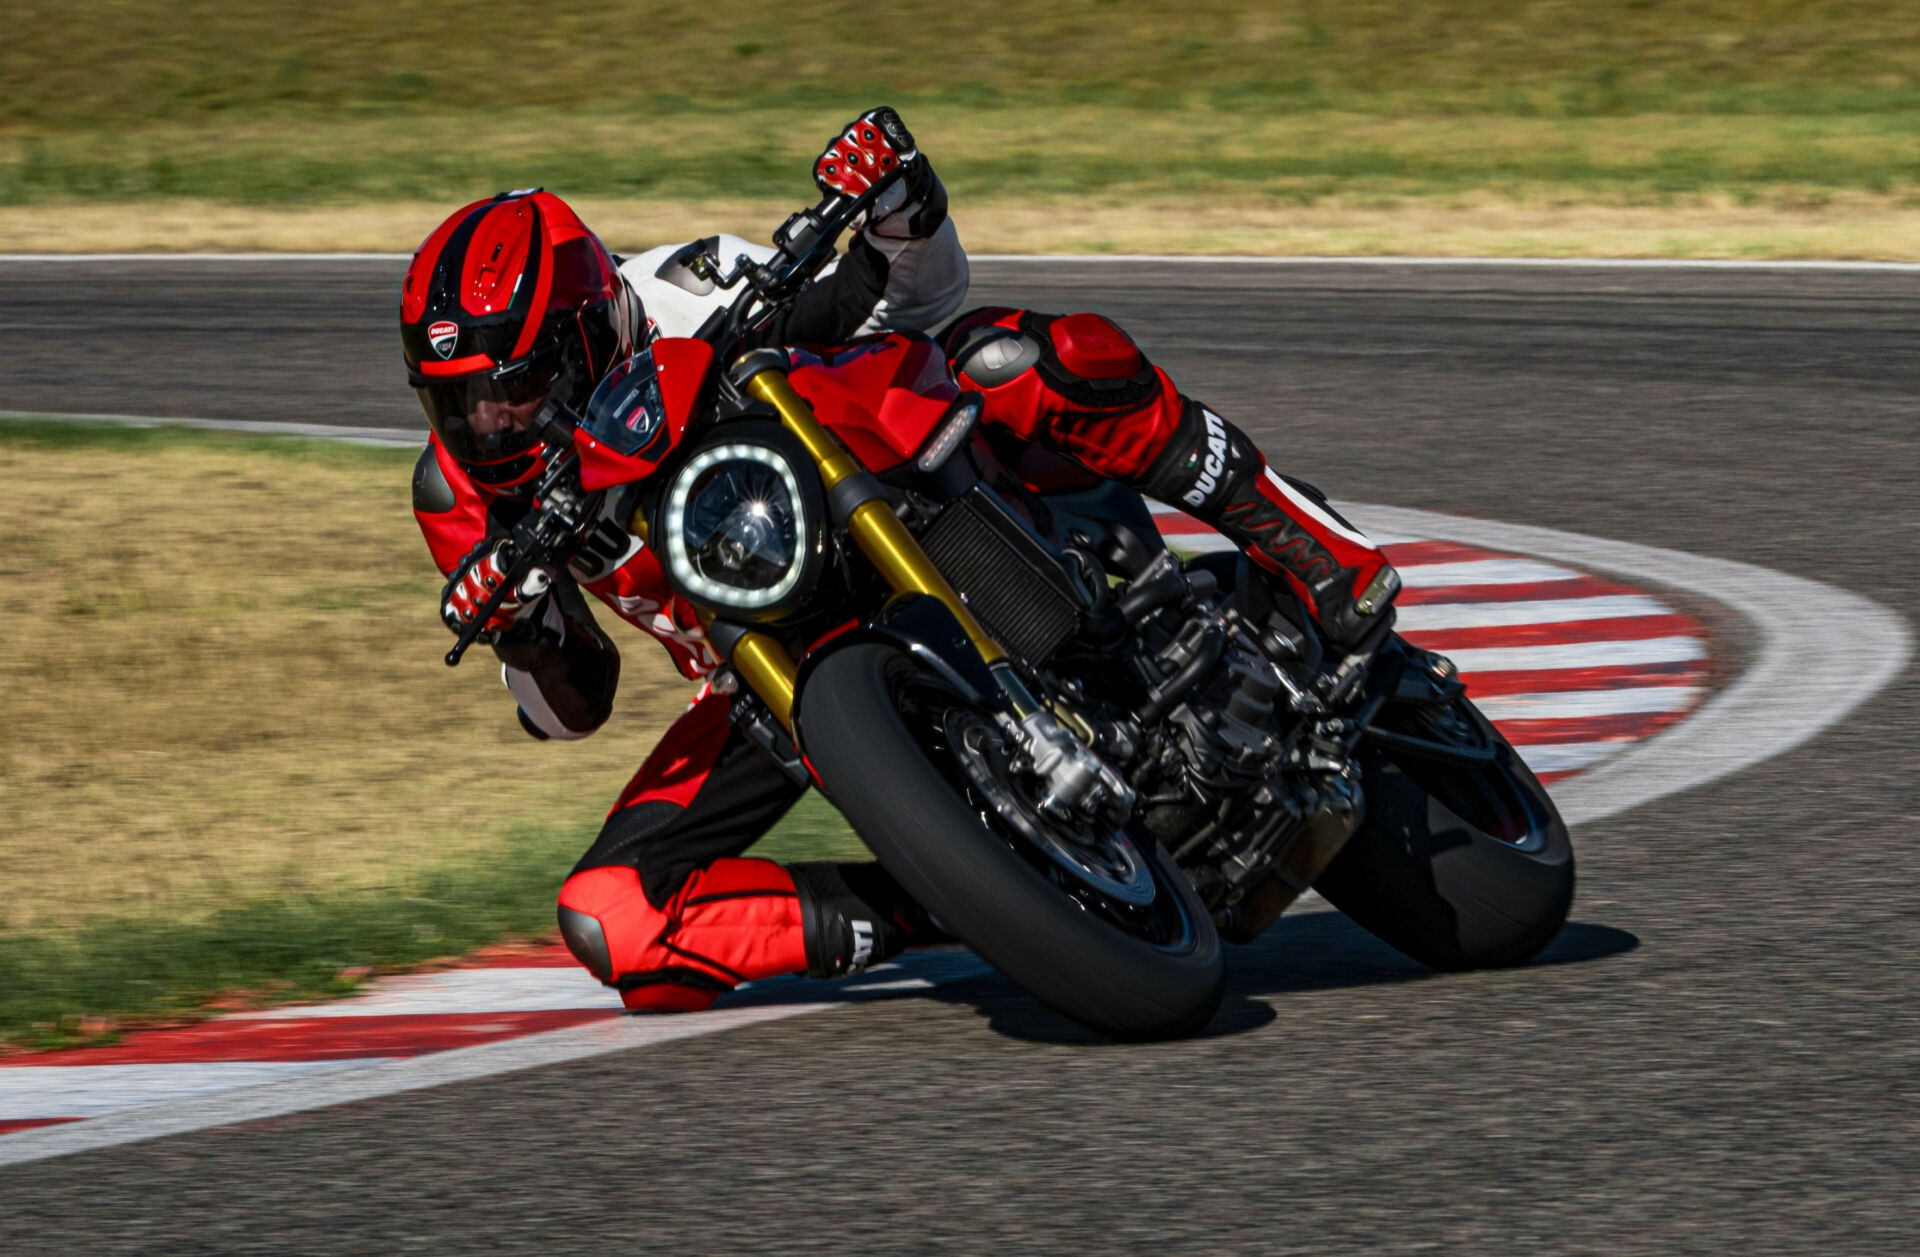 A 2023 Ducati Monster SP at speed. Photo courtesy Ducati.